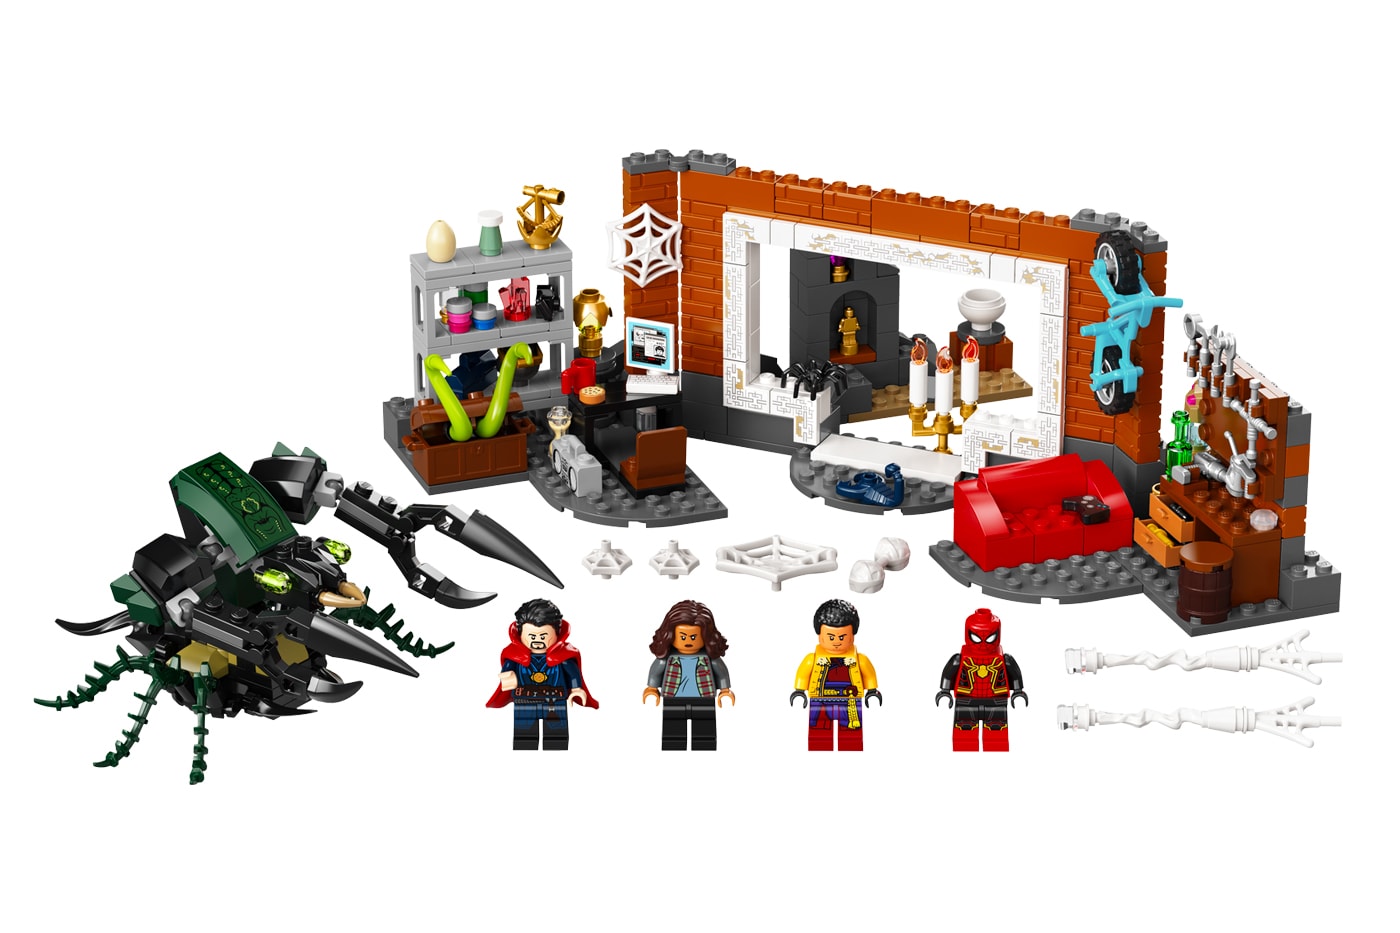 LEGO Spider-Man No Way Home at the Sanctum Workshop playset marvel tobey maguire andrew garfield tom holland superheroes 